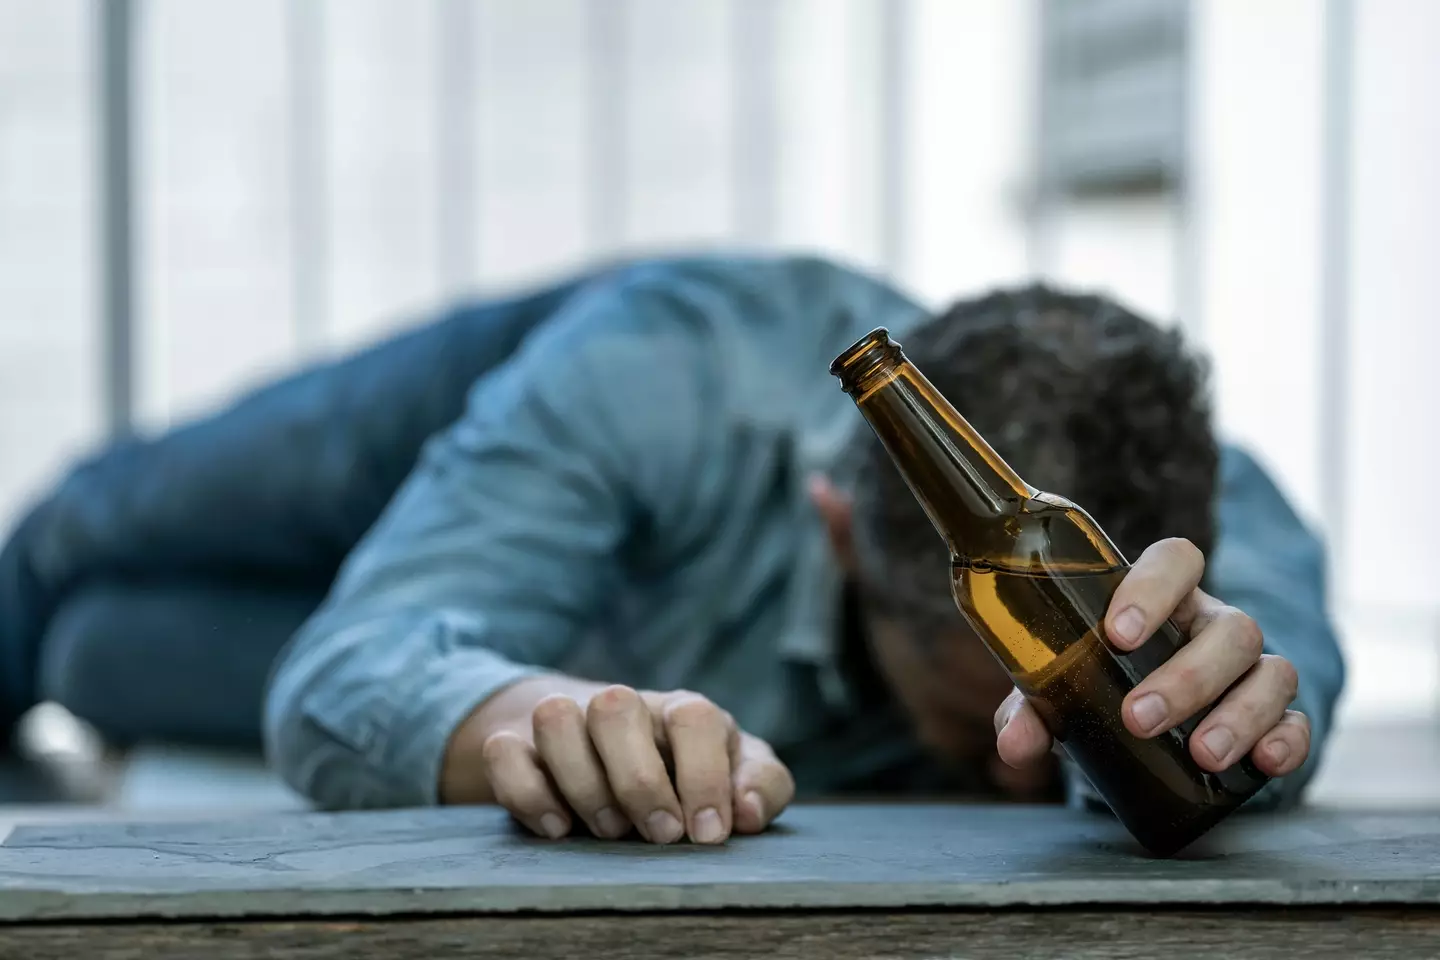 The smallest category, 'Chronic Severe', are closest to the public perception of alcoholics and most likely to seek help.